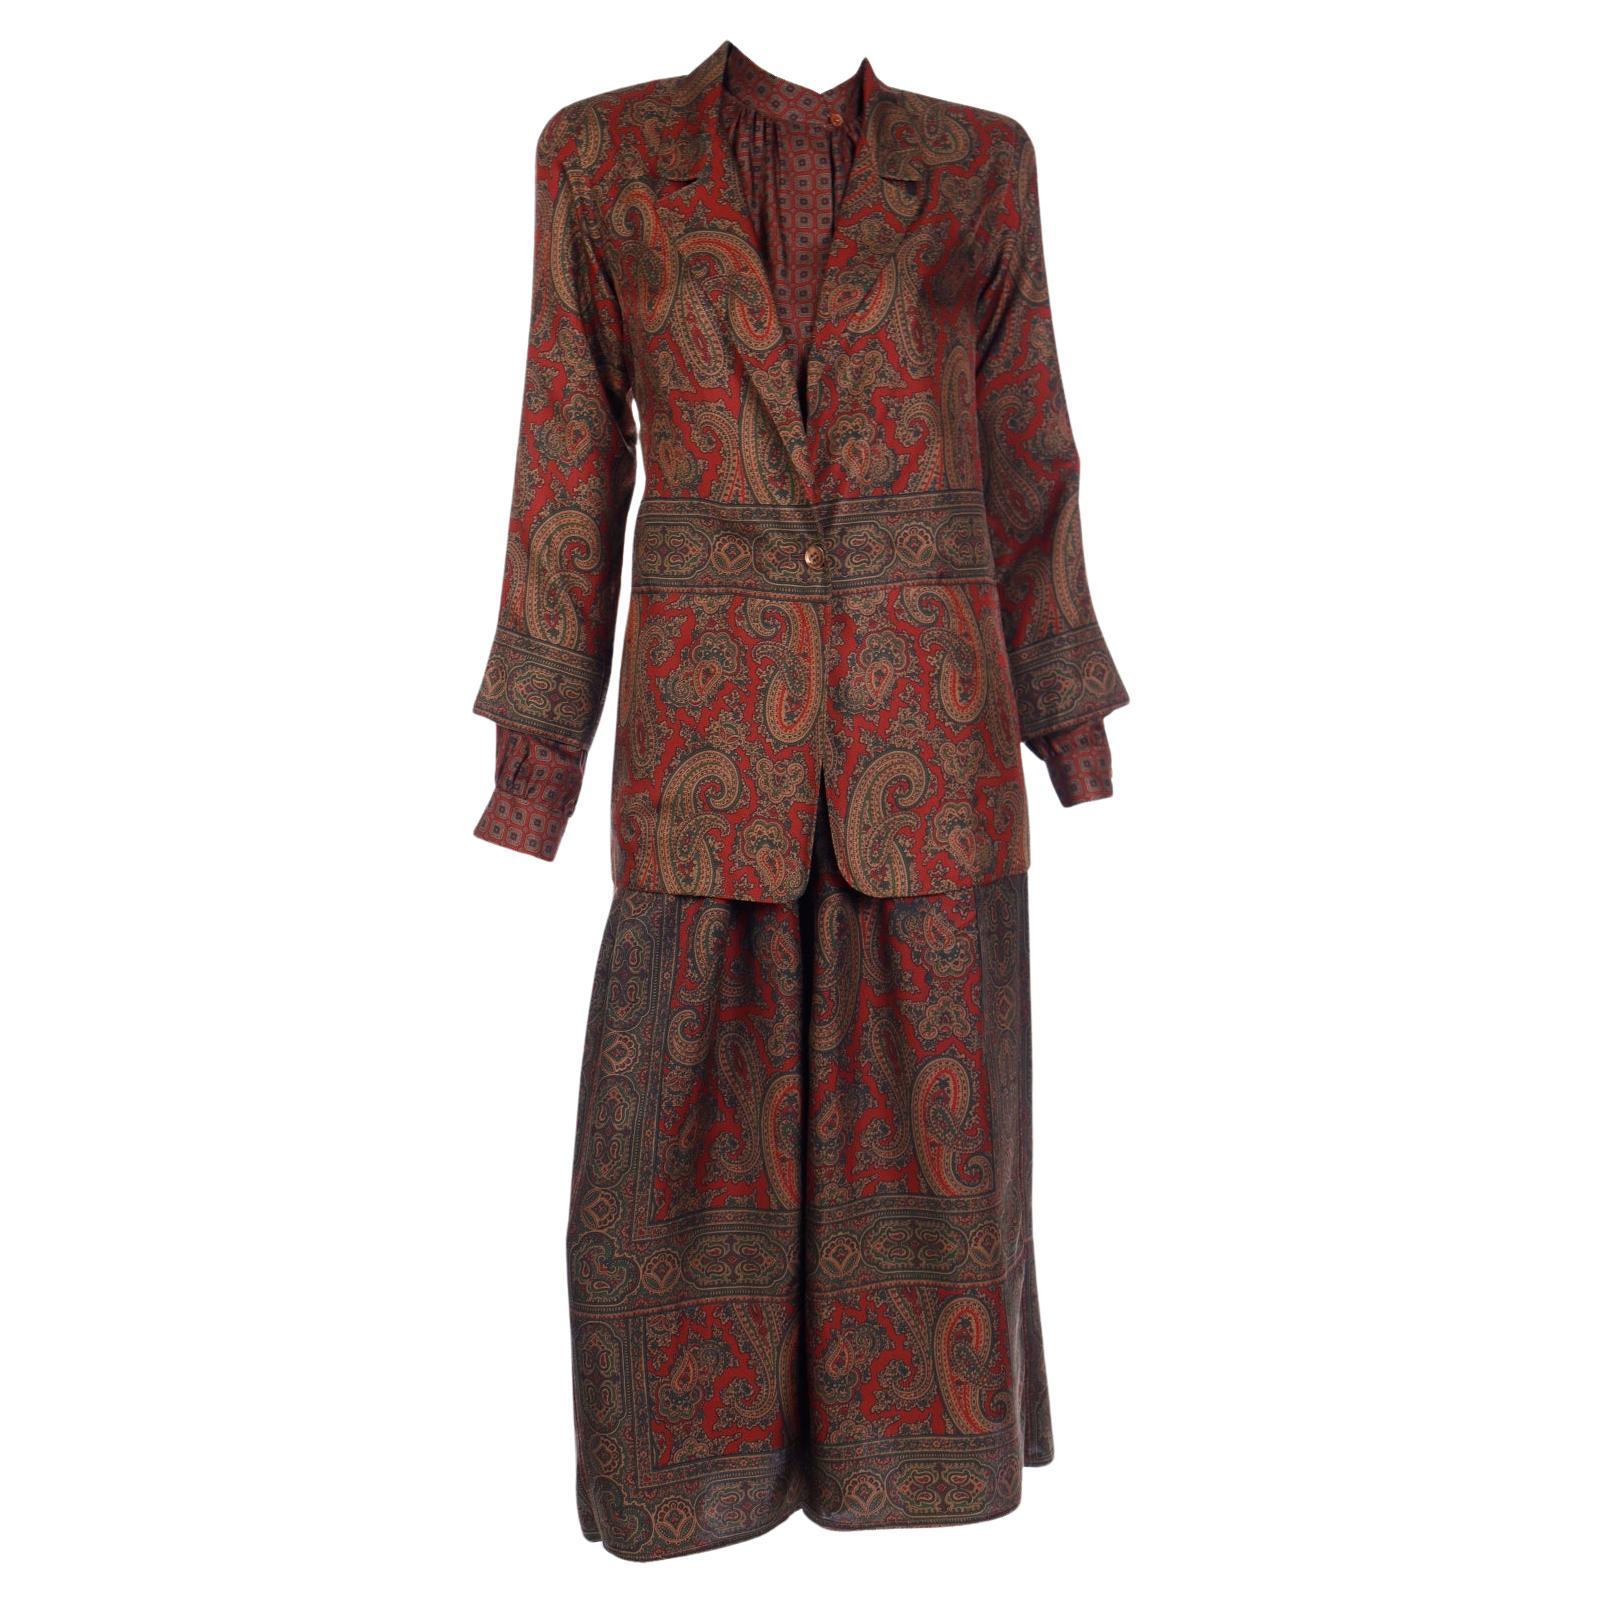 Anne Klein 1970s 3 Pc Blouse & Silk Jacket & Skirt Burgundy Paisley Print Outfit For Sale